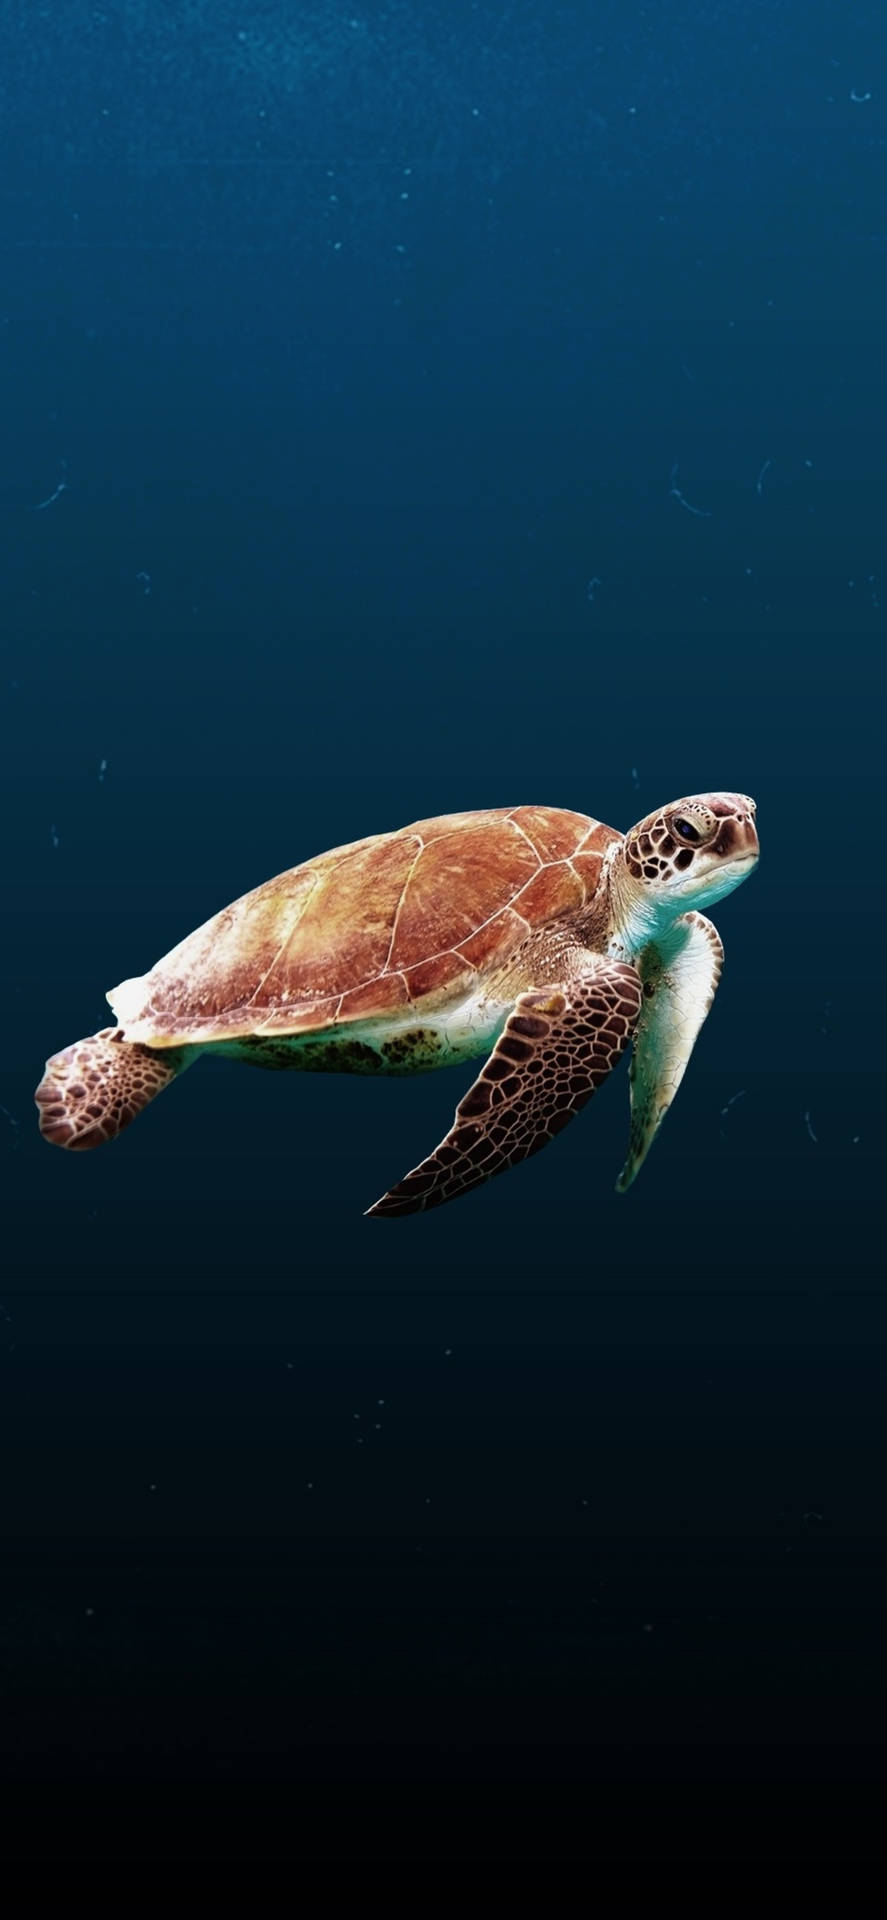 Sea Turtle Side View iPhone Wallpaper